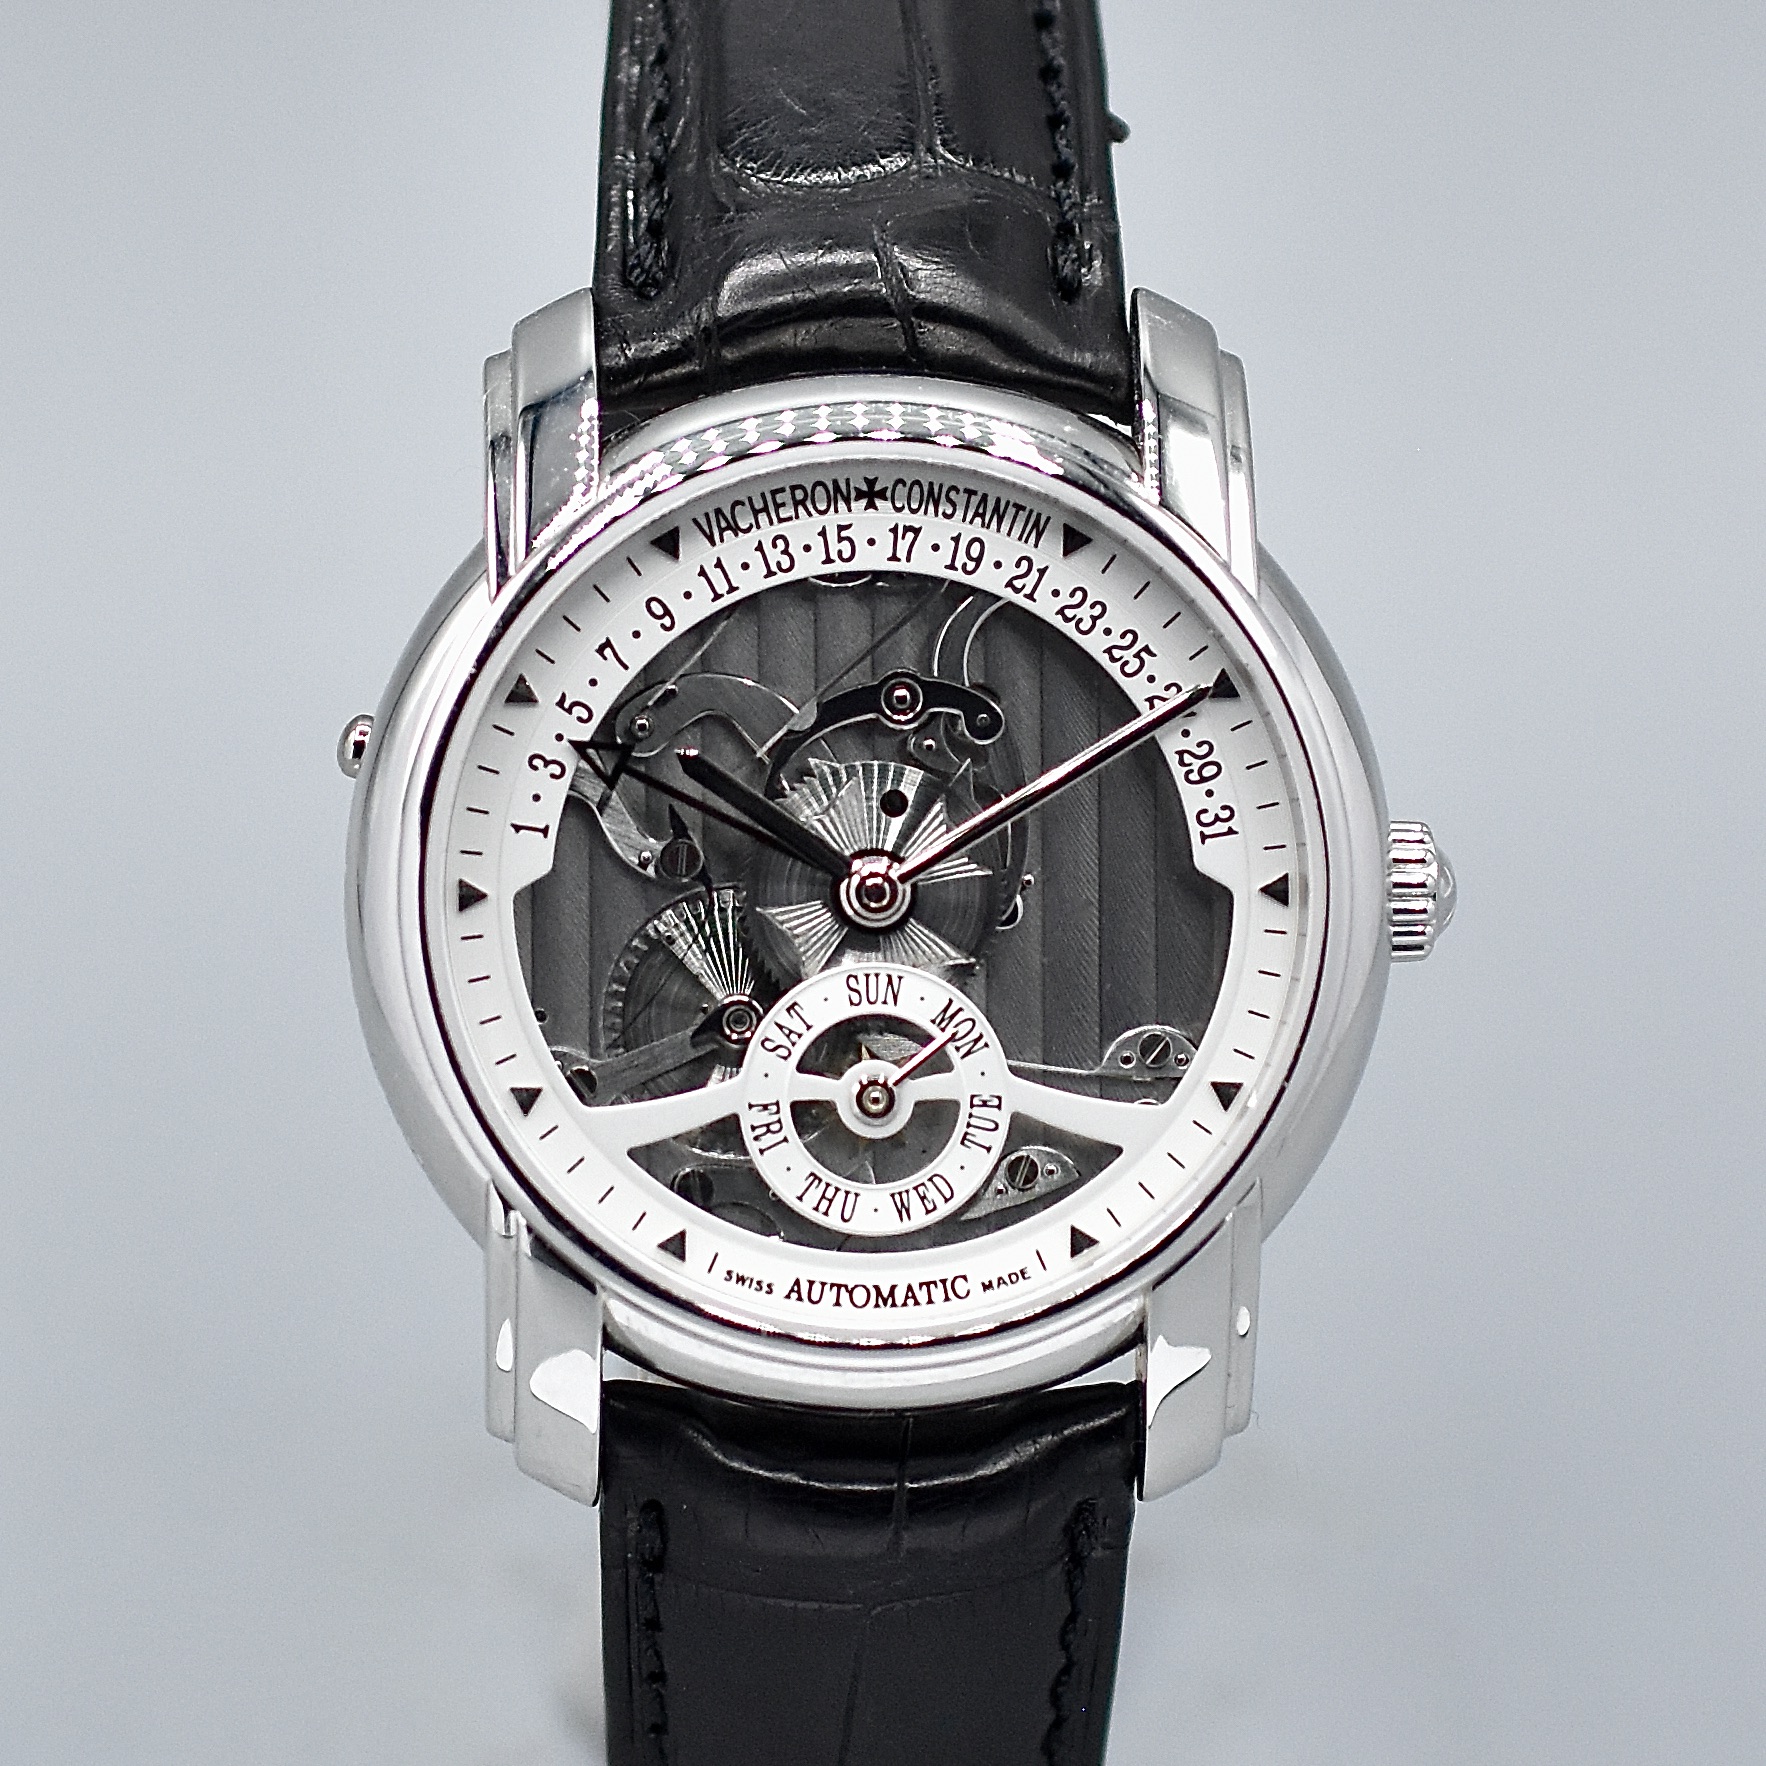 VACHERON CONSTANTIN SKELETON RETROGRADE LIMITED EDITION REF. 47247 PLATINUM WITH EXTRACT FROM THE ARCHIVES